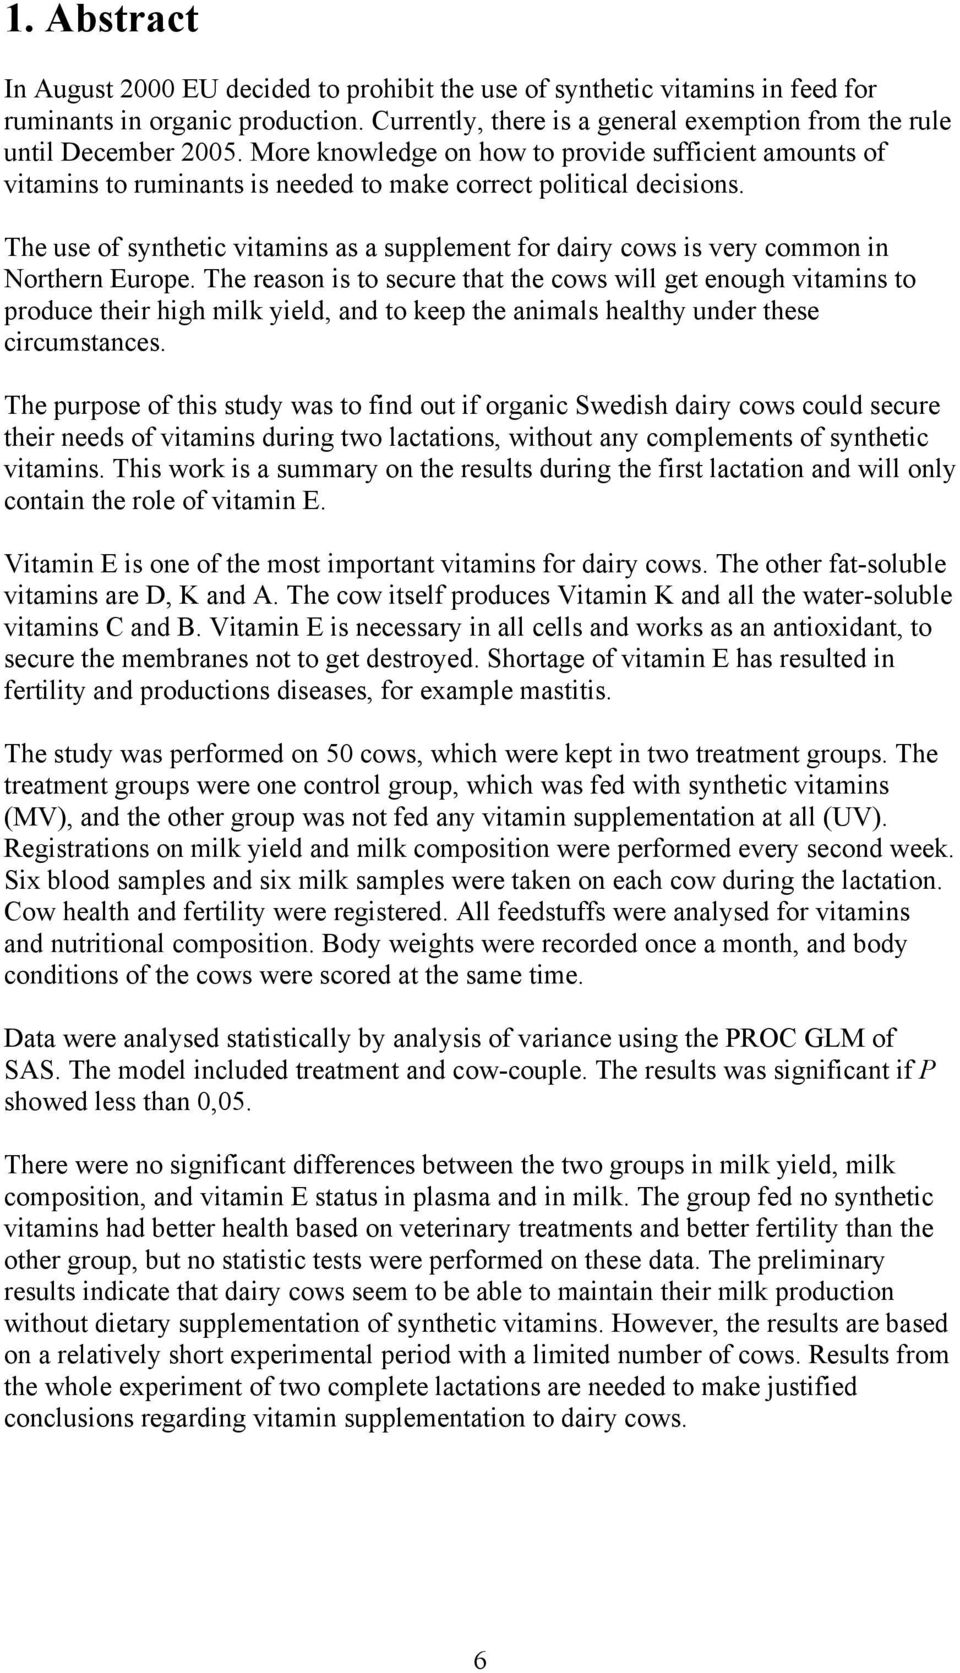 The use of synthetic vitamins as a supplement for dairy cows is very common in Northern Europe.